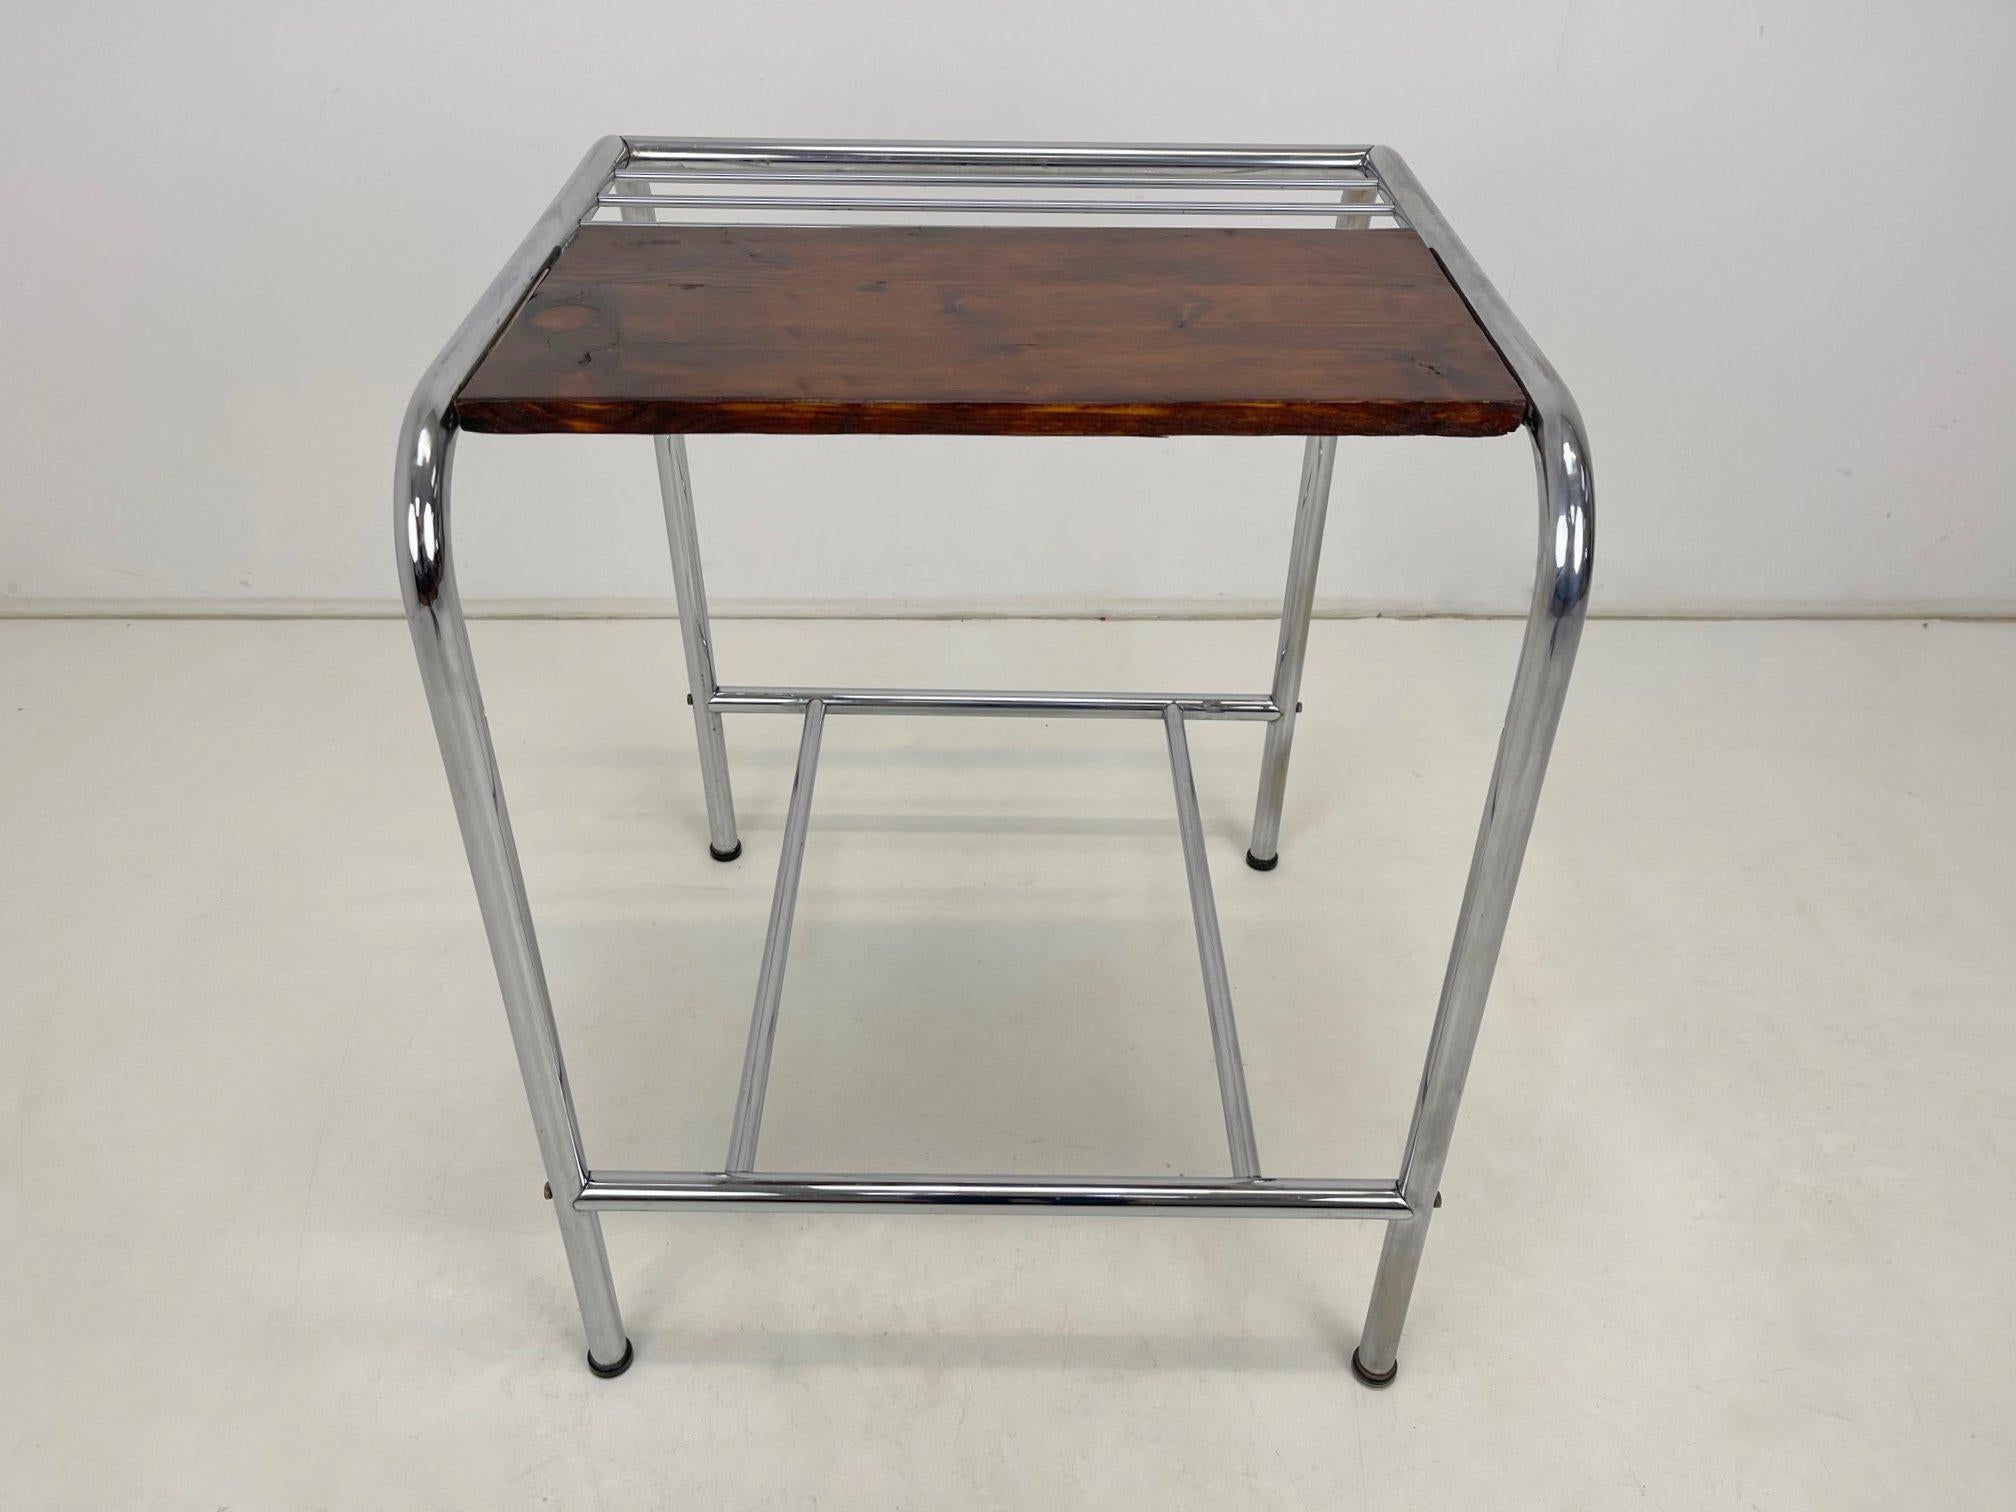 Functionalist Chrome & Wood Table, 1950's In Good Condition For Sale In Praha, CZ